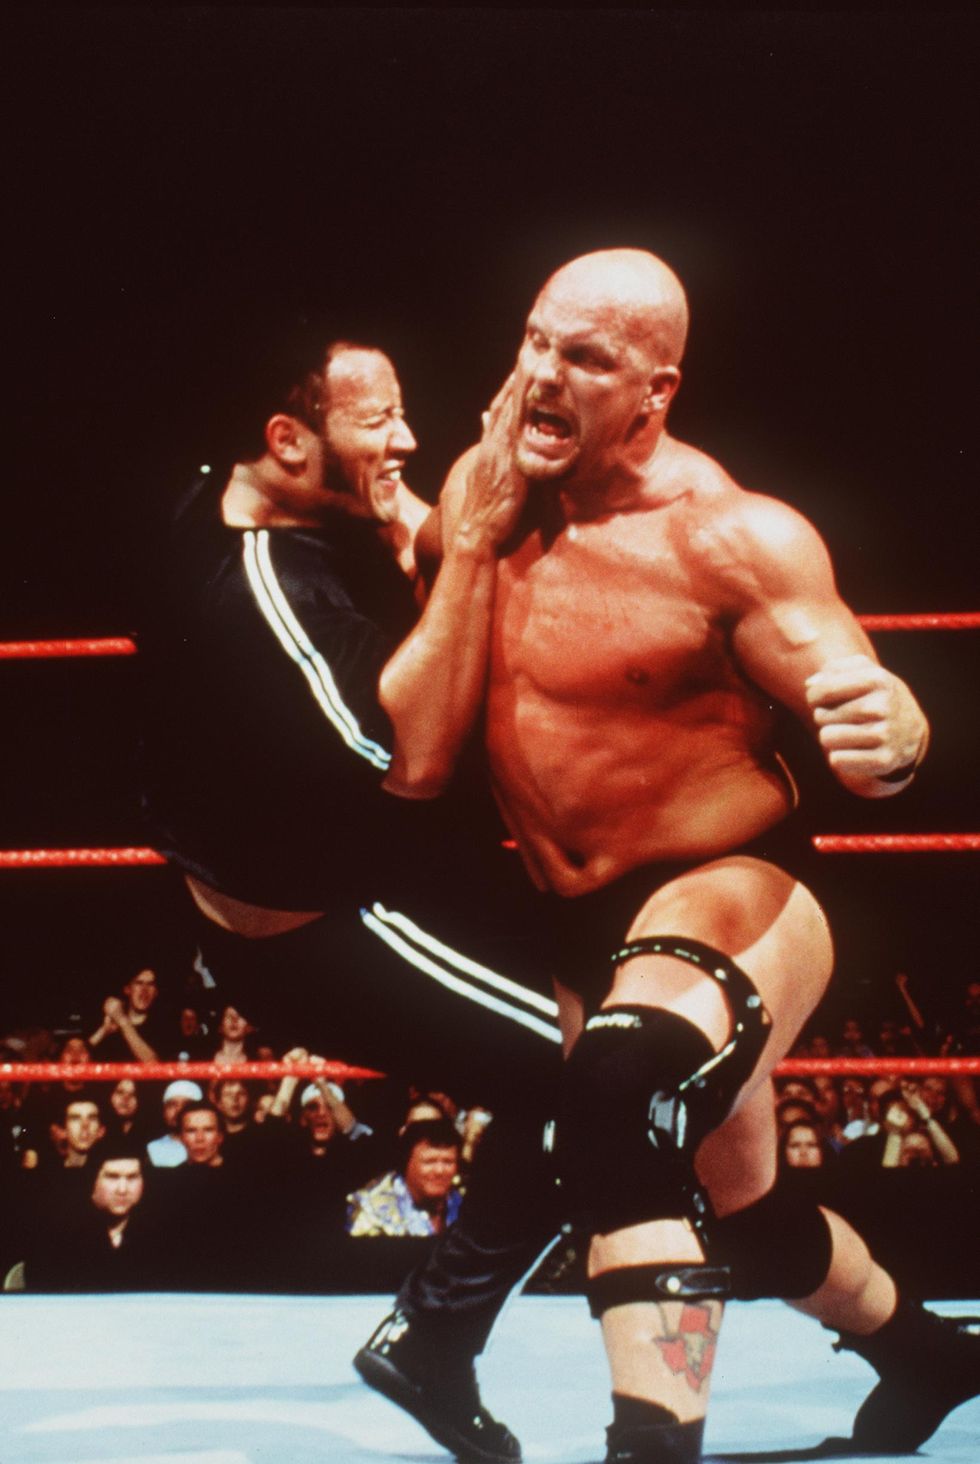 The Rock and "Stone Cold" Steve Austin during a smackdown